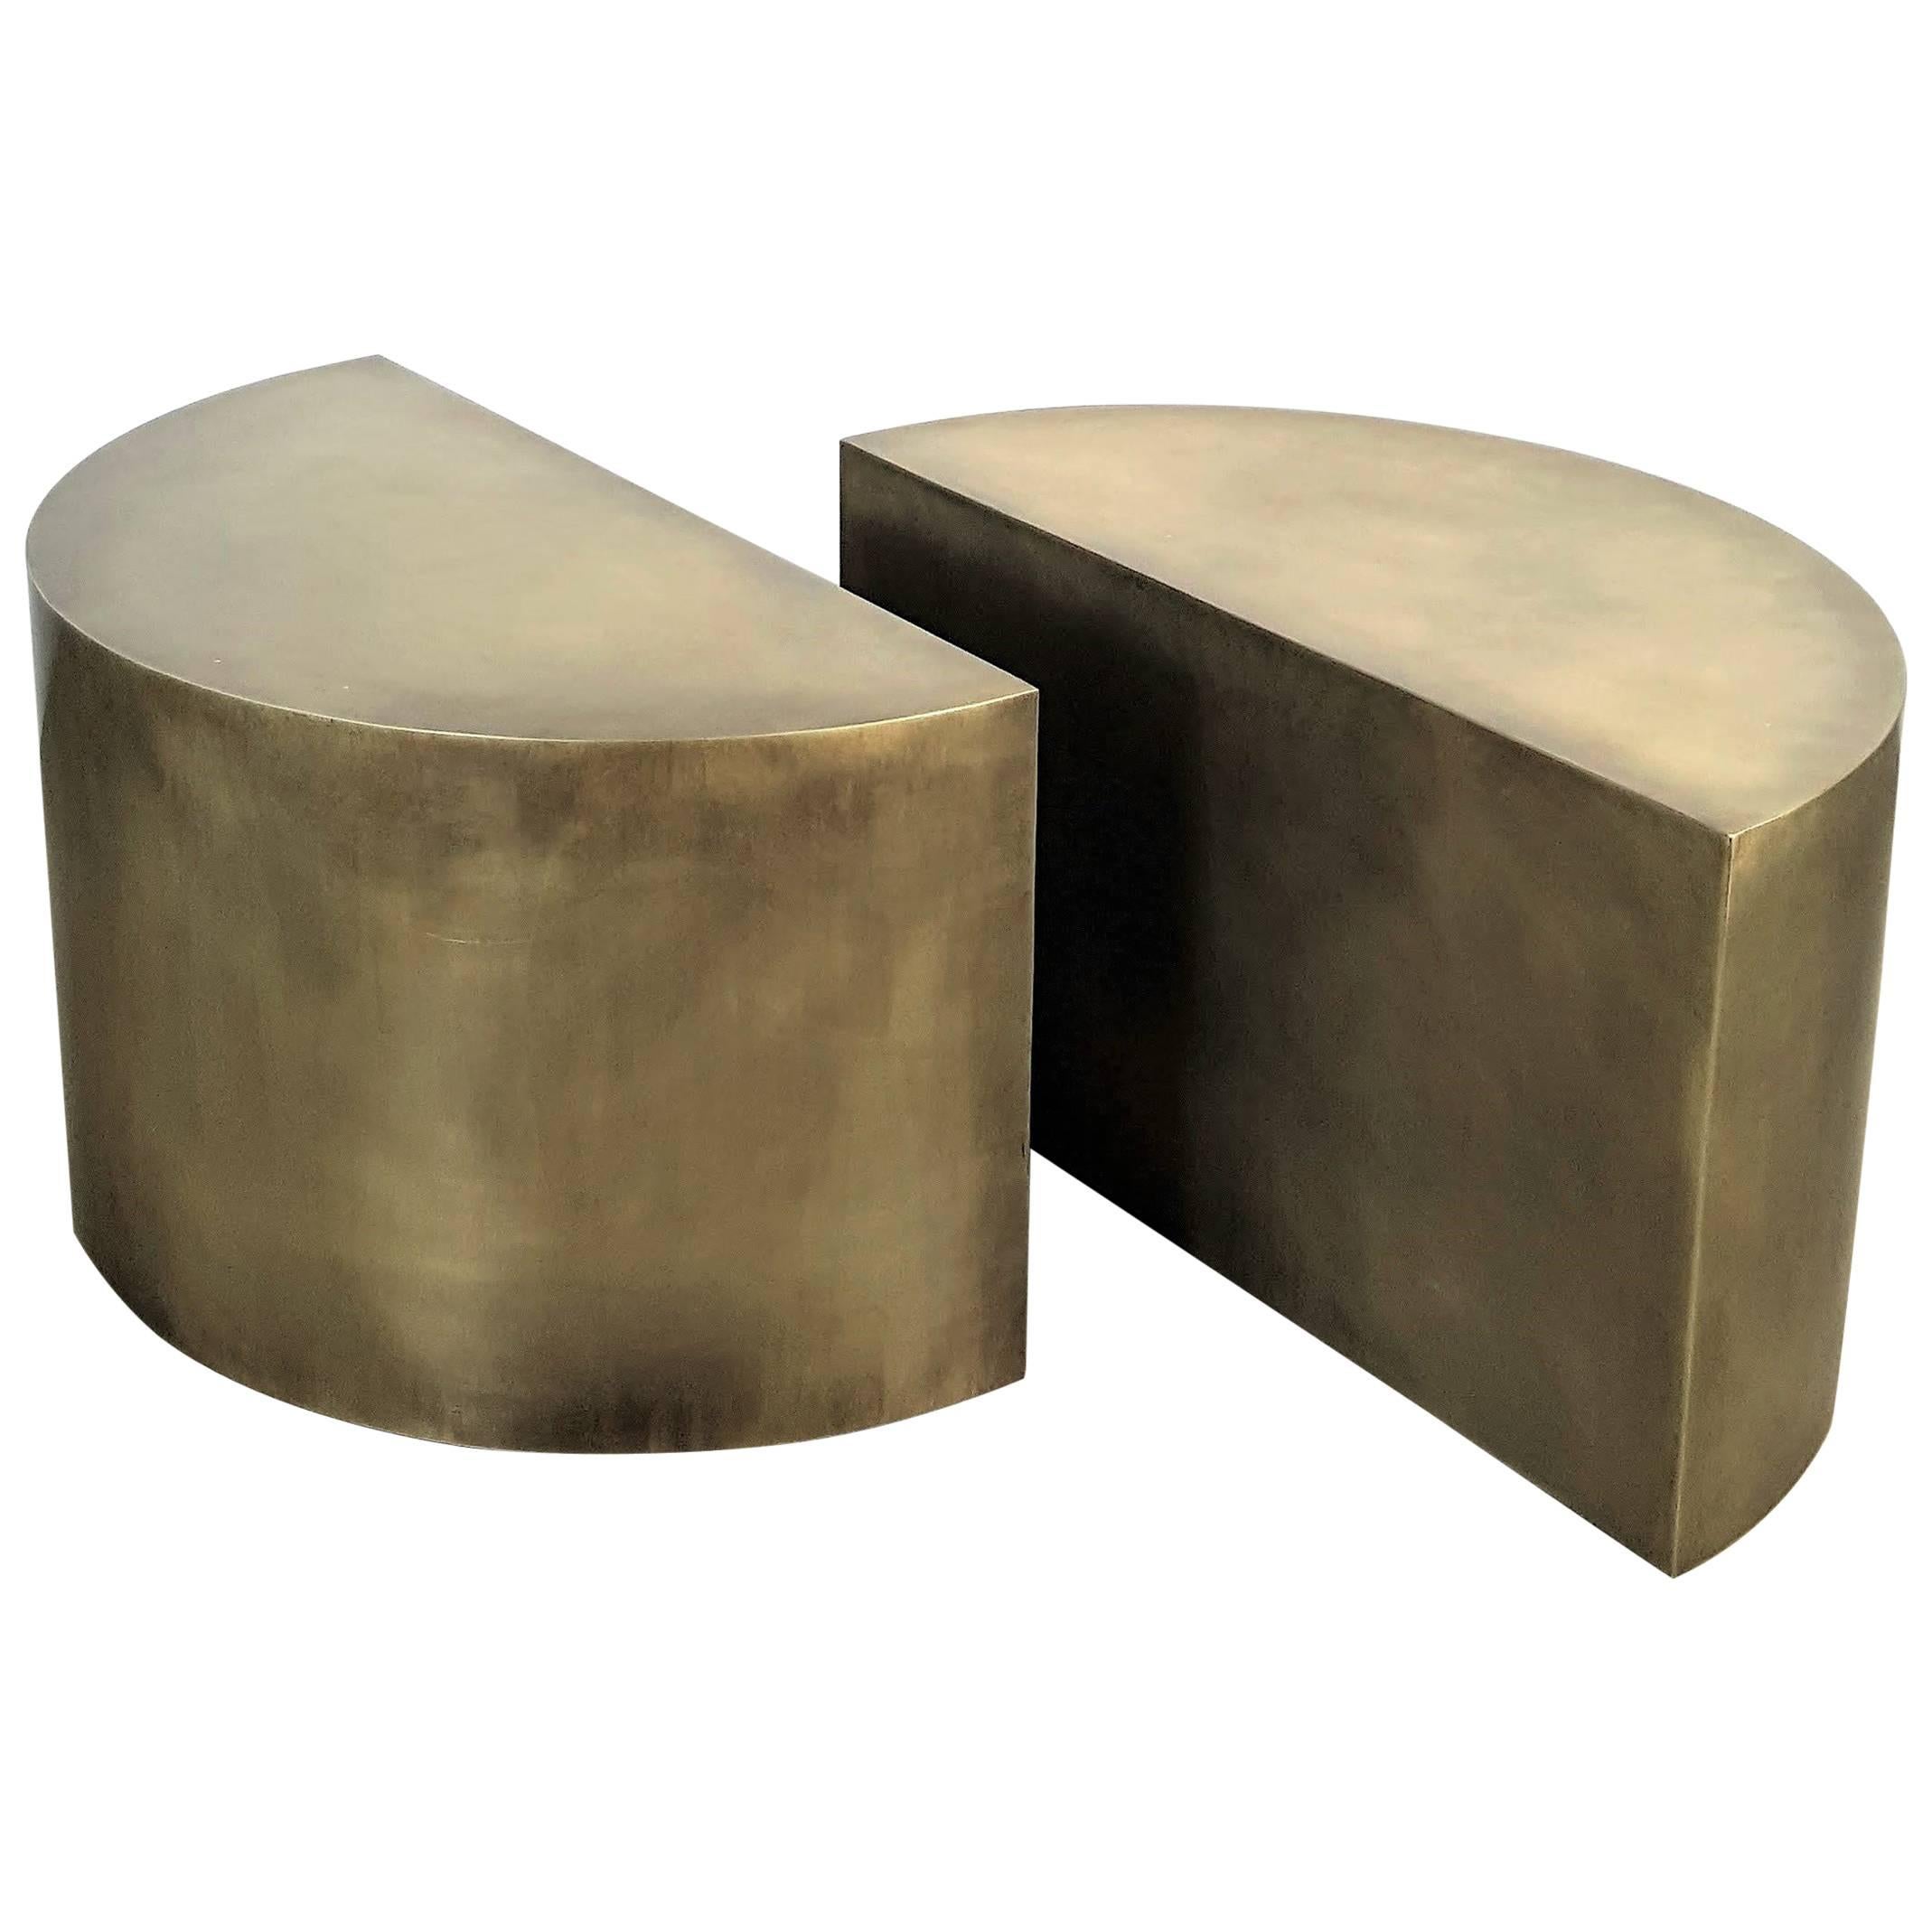 Solid Brass Geometric Demilune Side Tables with Heavy Patina, a pair